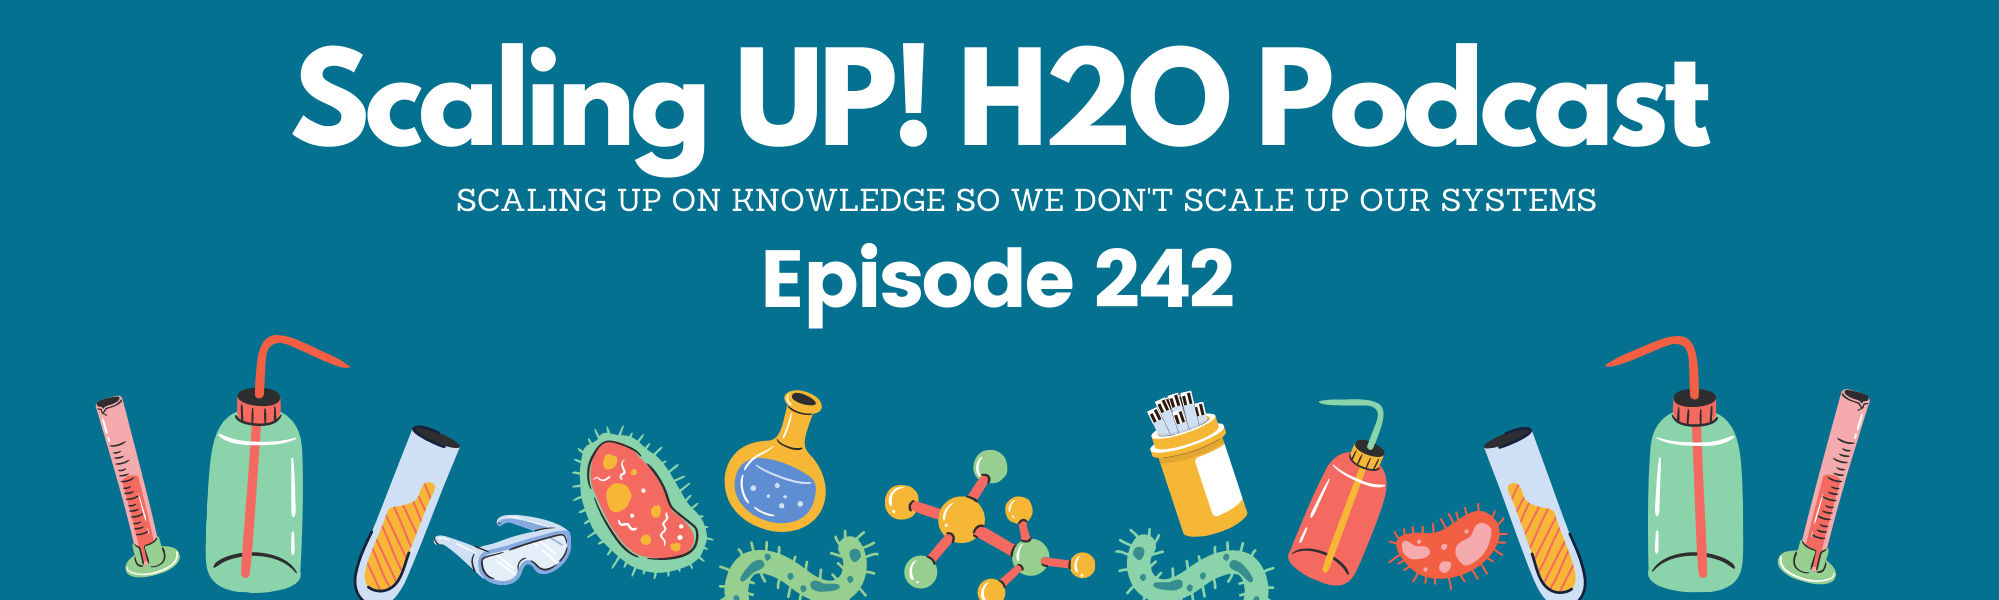 242 The One About What To Do When Dip Slides Don’t Work - Scaling UP! H2O